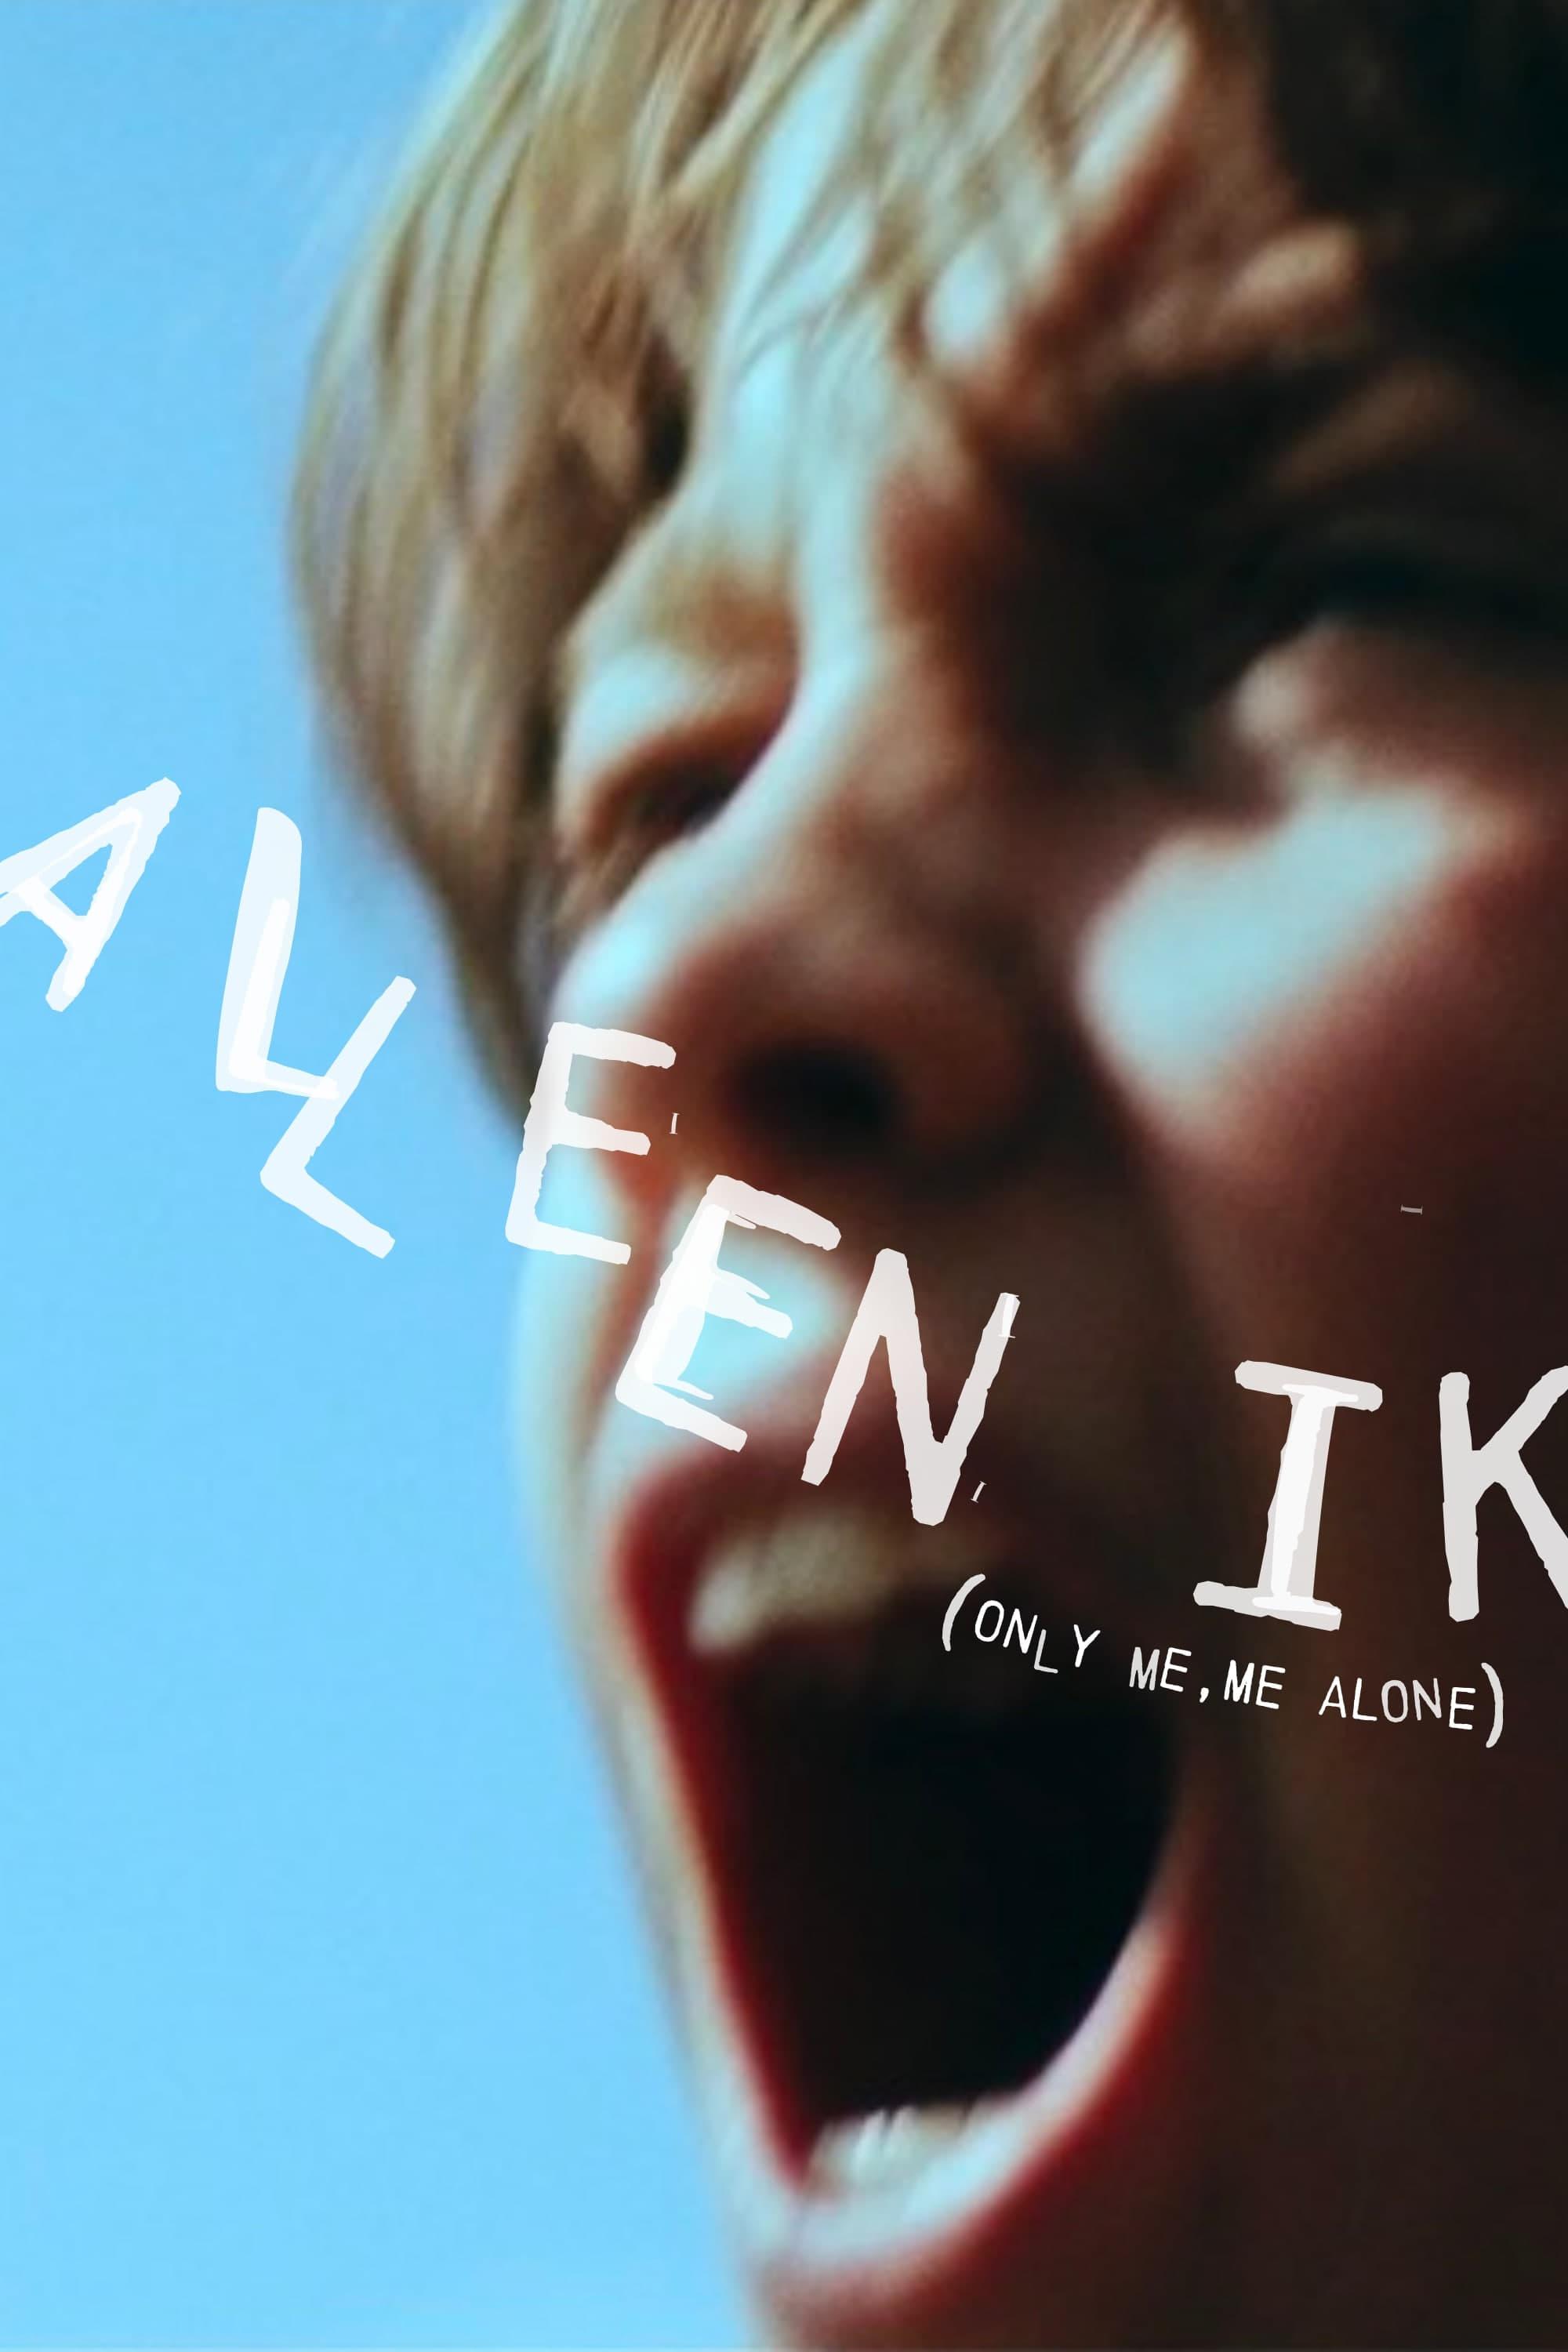 Alleen Ik (Only me, me alone) poster